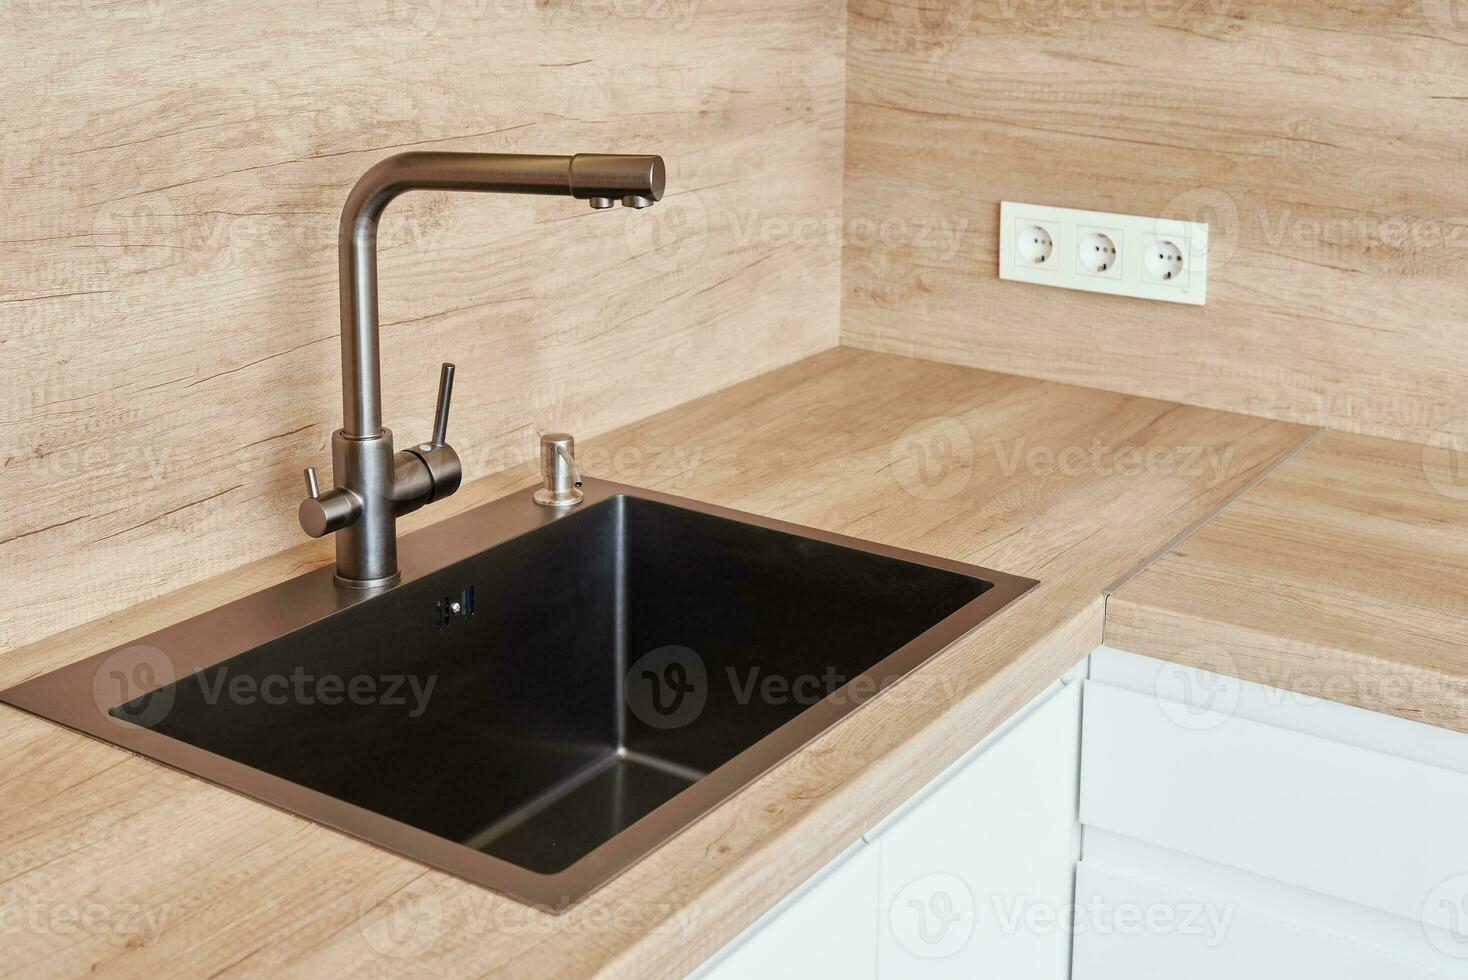 New kitchen interior with sink and mixer photo